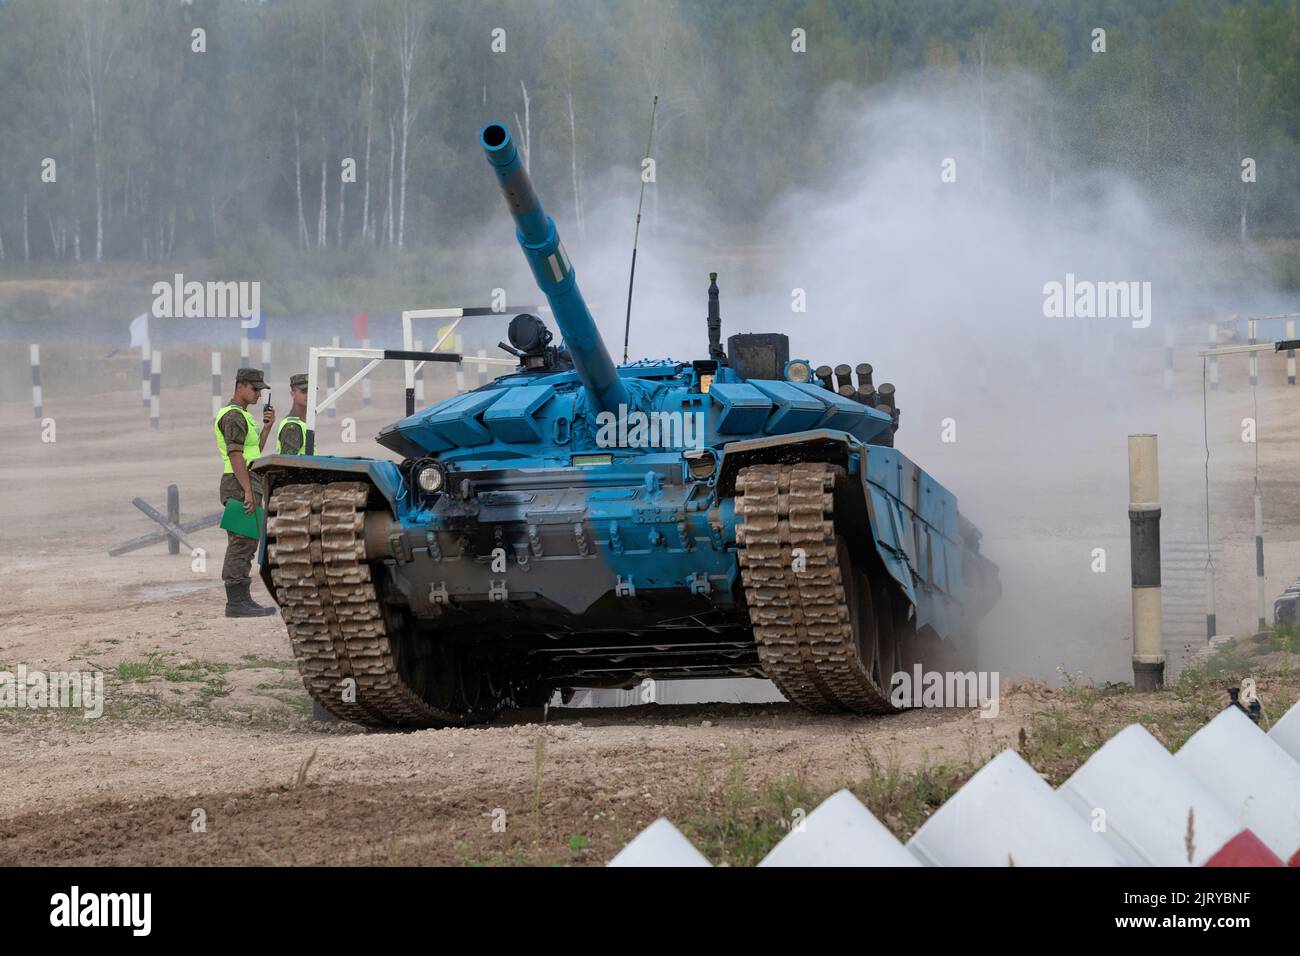 ALABINO, RUSSIA - AUGUST 19, 2022: Tank T-72B3 of the team of the Republic of Abkhazia after overcoming the 'Ditch' obstacle. Tank Biathlon, Internati Stock Photo